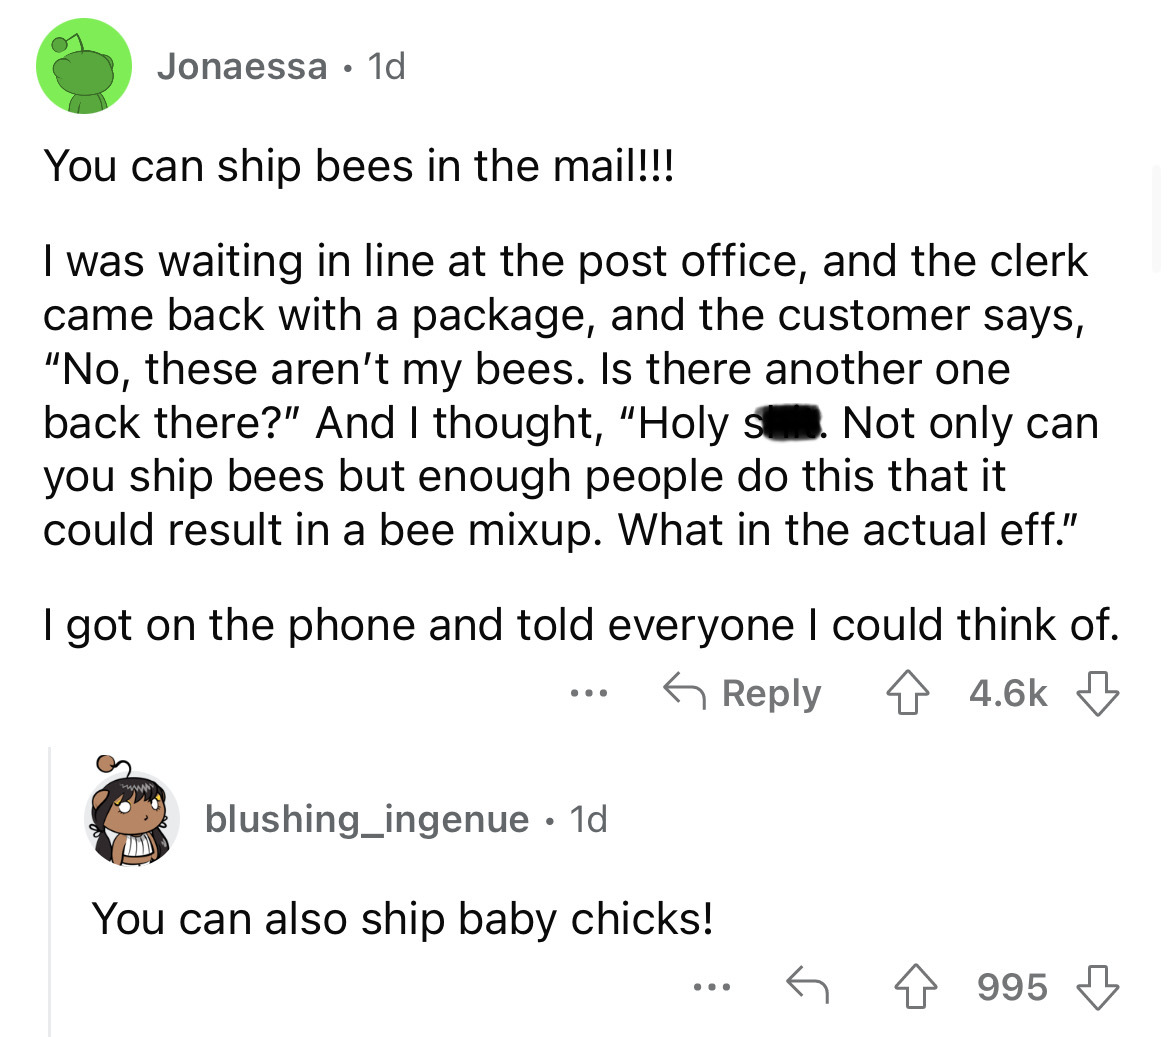 angle - Jonaessa. 1d You can ship bees in the mail!!! I was waiting in line at the post office, and the clerk came back with a package, and the customer says, "No, these aren't my bees. Is there another one back there?" And I thought, "Holy s. Not only ca